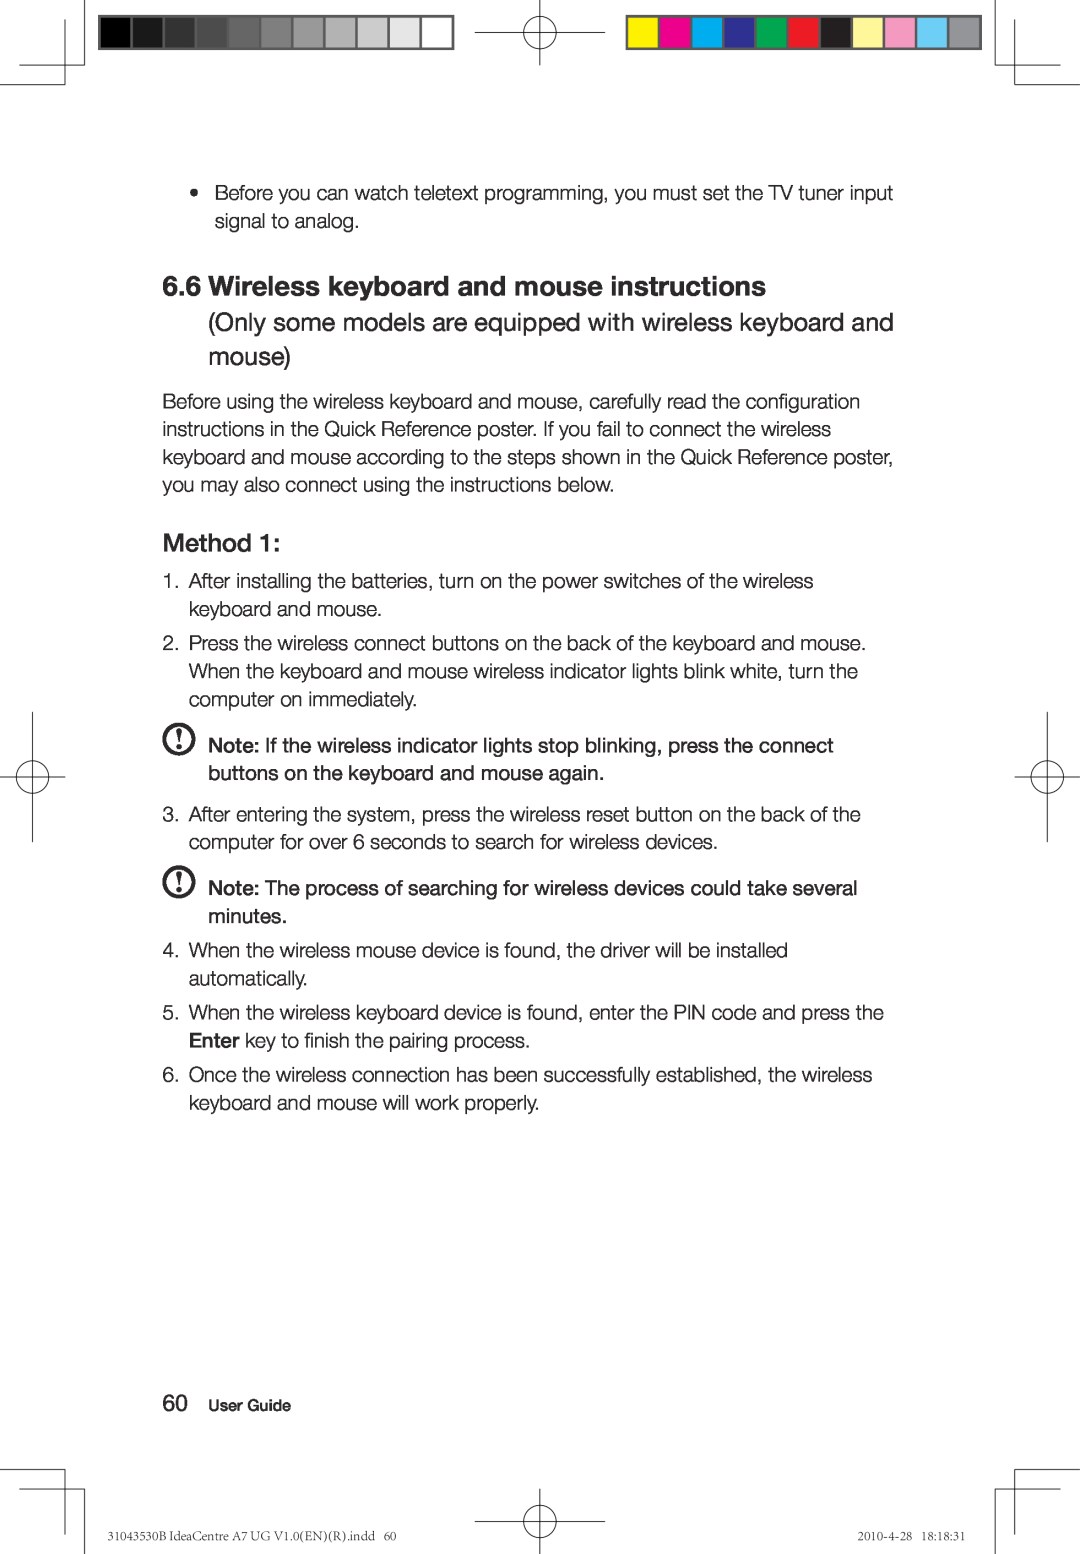 Lenovo A7 Wireless keyboard and mouse instructions, Only some models are equipped with wireless keyboard and mouse, Method 